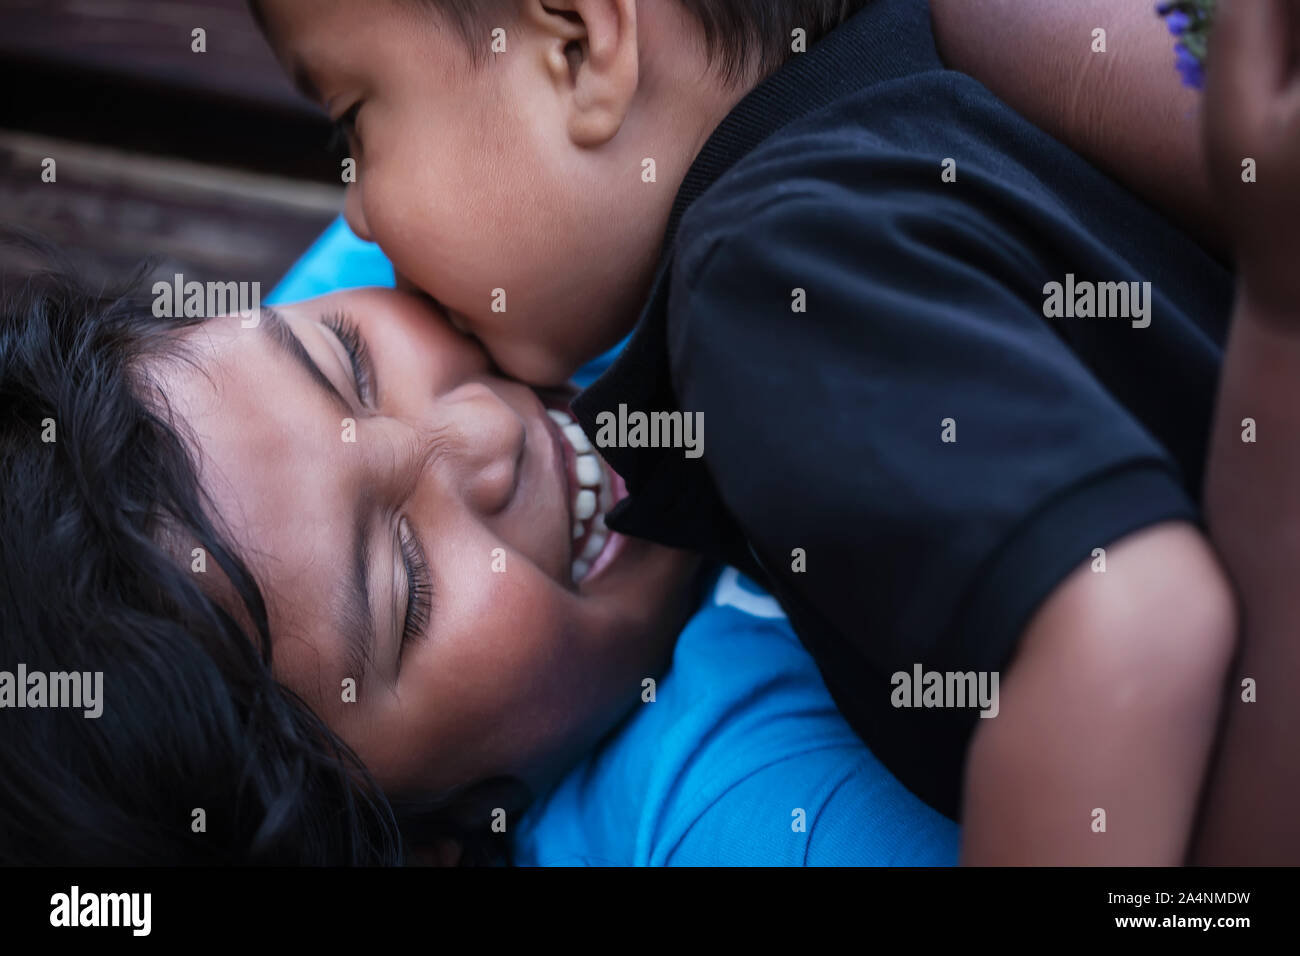 A little brother gives his big sister a kiss on her cheek while she laughs out loud in joy. Stock Photo